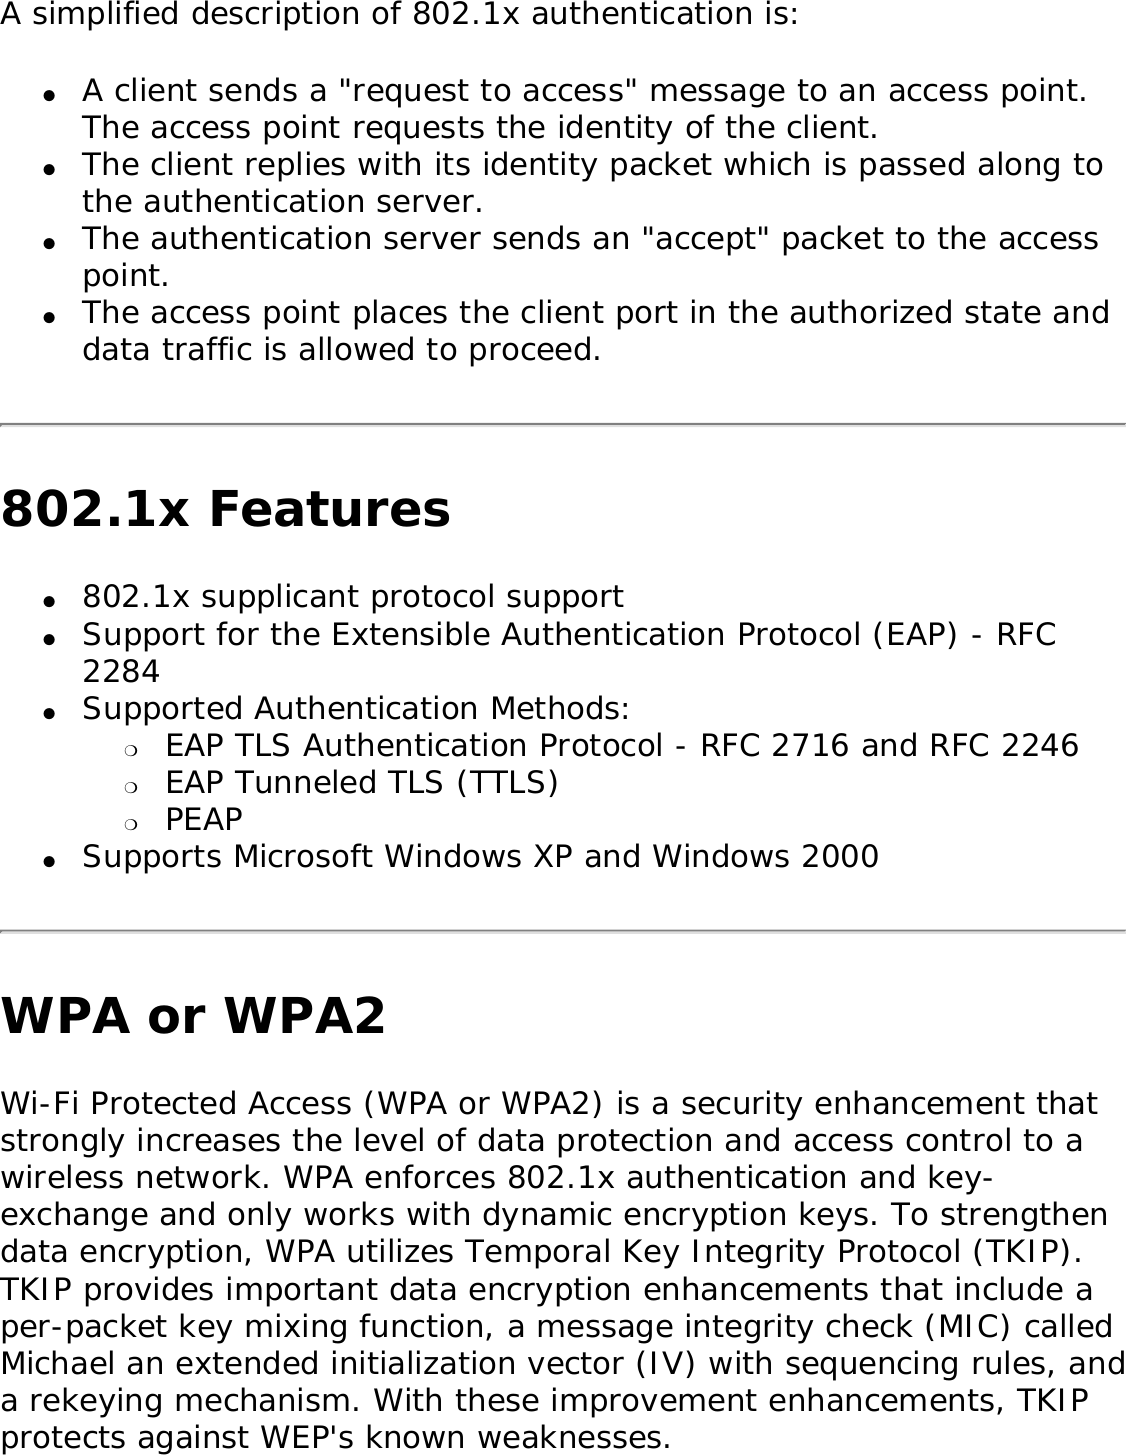 A simplified description of 802.1x authentication is: ●     A client sends a &quot;request to access&quot; message to an access point. The access point requests the identity of the client. ●     The client replies with its identity packet which is passed along to the authentication server. ●     The authentication server sends an &quot;accept&quot; packet to the access point. ●     The access point places the client port in the authorized state and data traffic is allowed to proceed. 802.1x Features●     802.1x supplicant protocol support ●     Support for the Extensible Authentication Protocol (EAP) - RFC 2284 ●     Supported Authentication Methods: ❍     EAP TLS Authentication Protocol - RFC 2716 and RFC 2246 ❍     EAP Tunneled TLS (TTLS) ❍     PEAP ●     Supports Microsoft Windows XP and Windows 2000 WPA or WPA2Wi-Fi Protected Access (WPA or WPA2) is a security enhancement that strongly increases the level of data protection and access control to a wireless network. WPA enforces 802.1x authentication and key-exchange and only works with dynamic encryption keys. To strengthen data encryption, WPA utilizes Temporal Key Integrity Protocol (TKIP). TKIP provides important data encryption enhancements that include a per-packet key mixing function, a message integrity check (MIC) called Michael an extended initialization vector (IV) with sequencing rules, and a rekeying mechanism. With these improvement enhancements, TKIP protects against WEP&apos;s known weaknesses. 